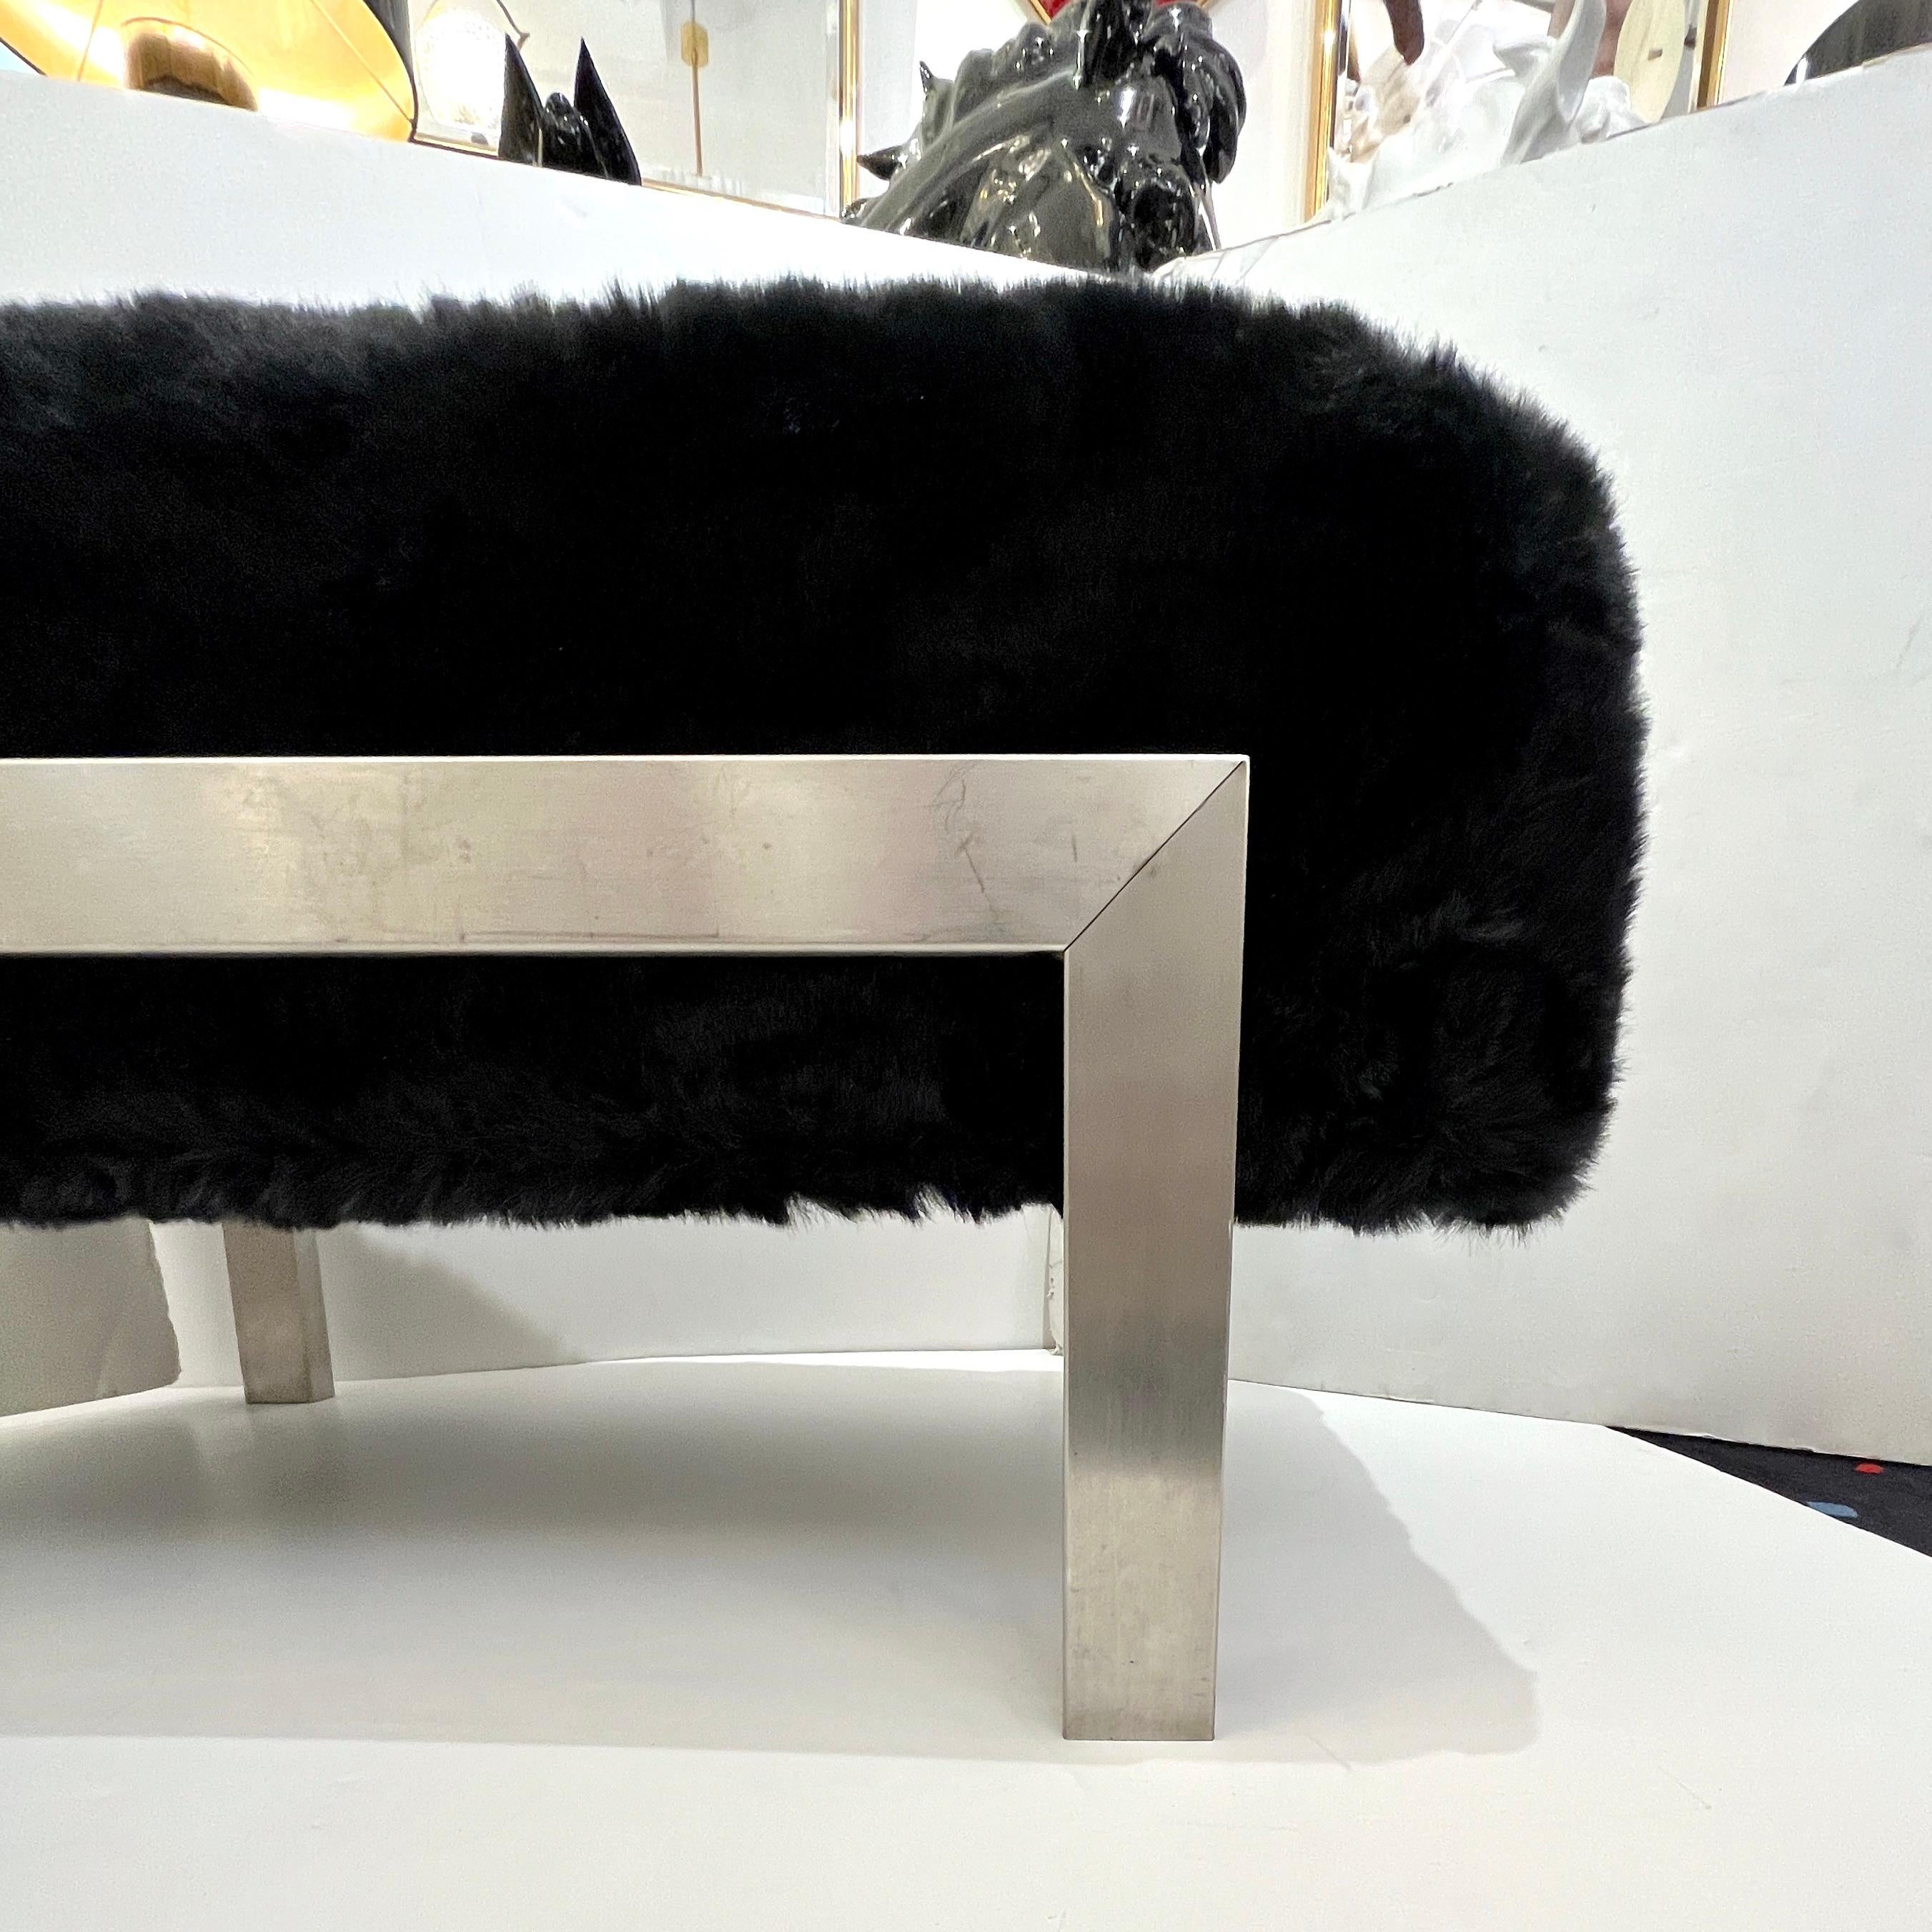 1970s Italian Vintage Black Faux Fur Steel Bed Stool Bench - 1 Pair available For Sale 7